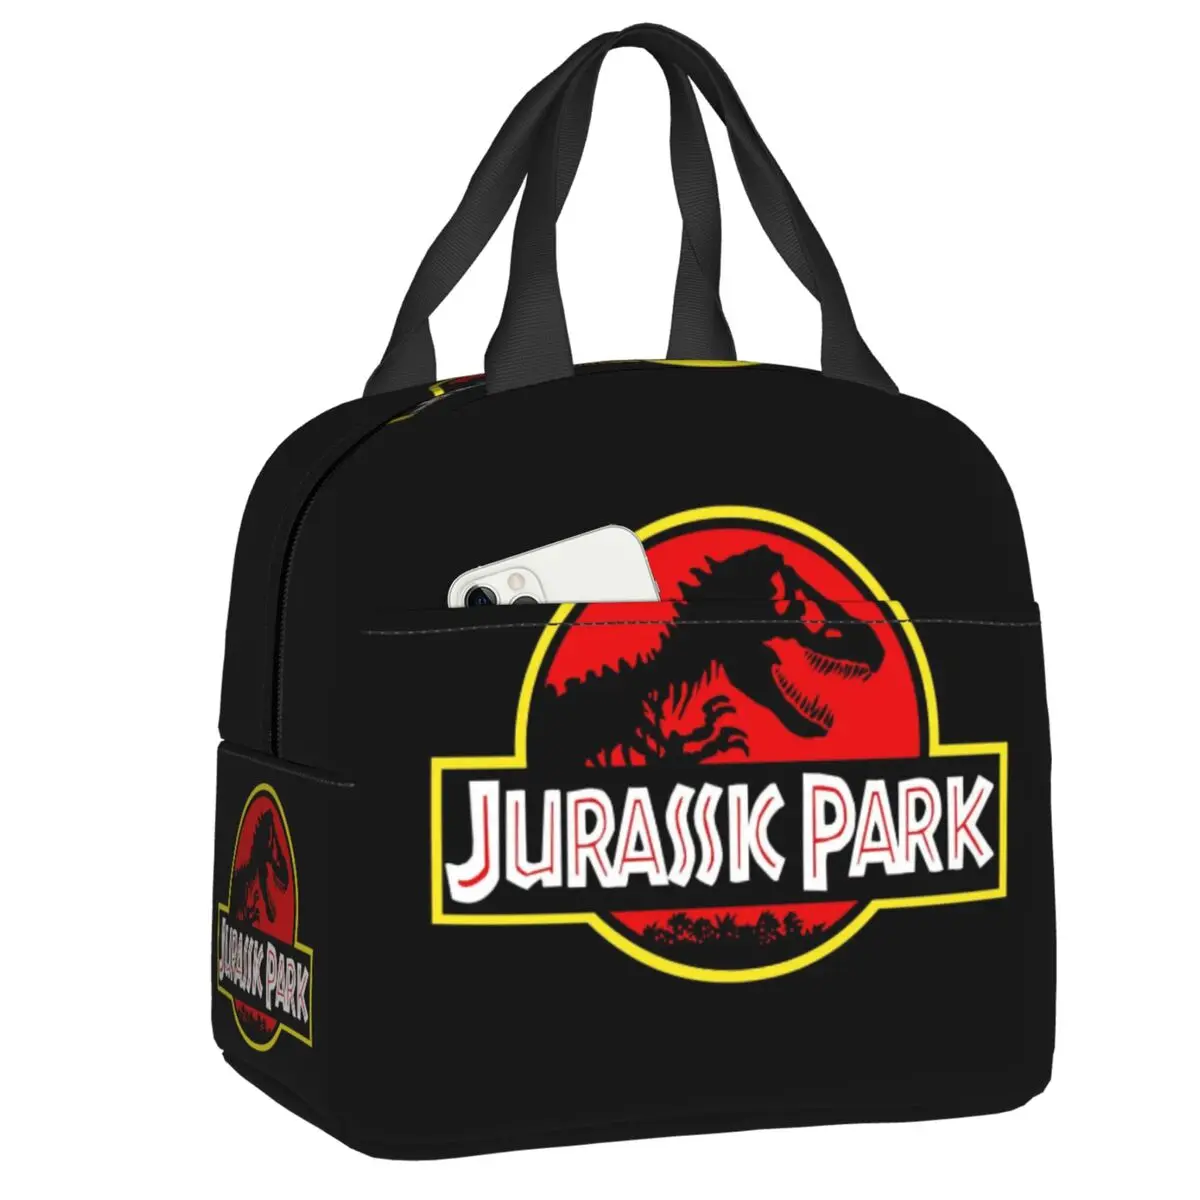 https://ae01.alicdn.com/kf/S4b70a0eea514447ab8328a3a7631ba15h/Jurassic-Park-Lunch-Box-Multifunction-Adventure-Dinosaur-World-Thermal-Cooler-Food-Insulated-Lunch-Bag-Office-Work.jpg